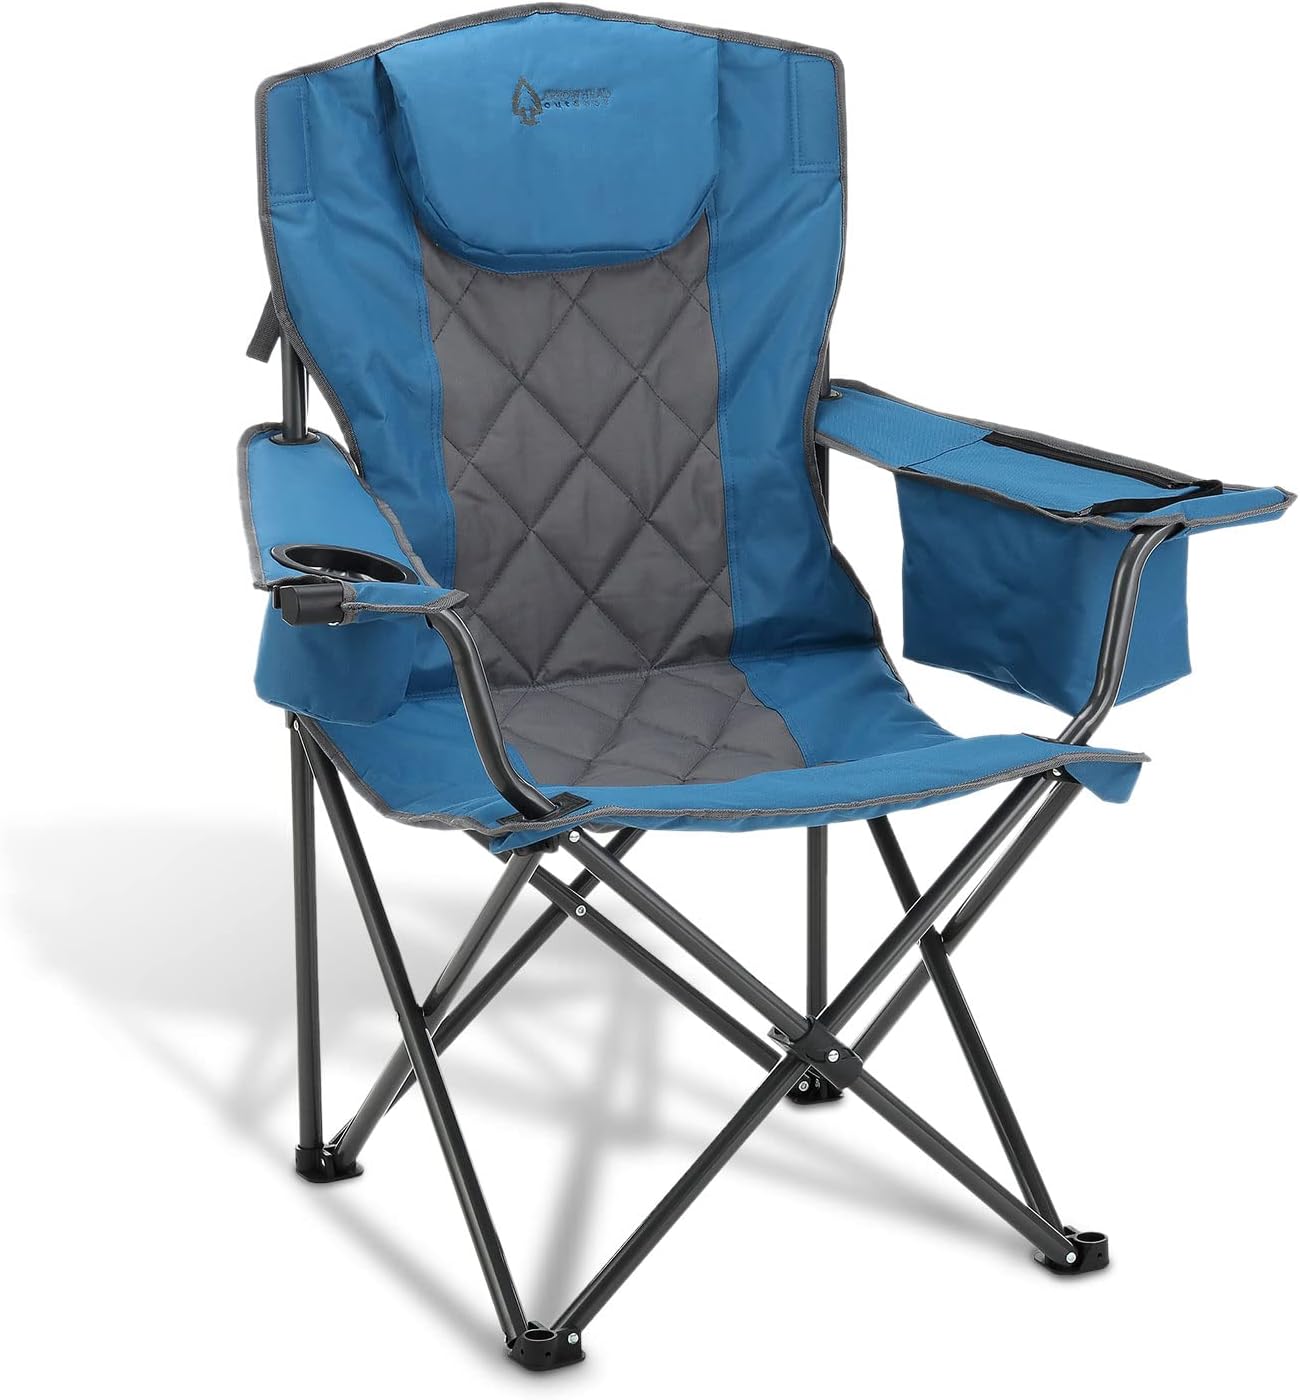 ARROWHEAD OUTDOOR Multi-Function 3-in-1 Compact Camp Chair